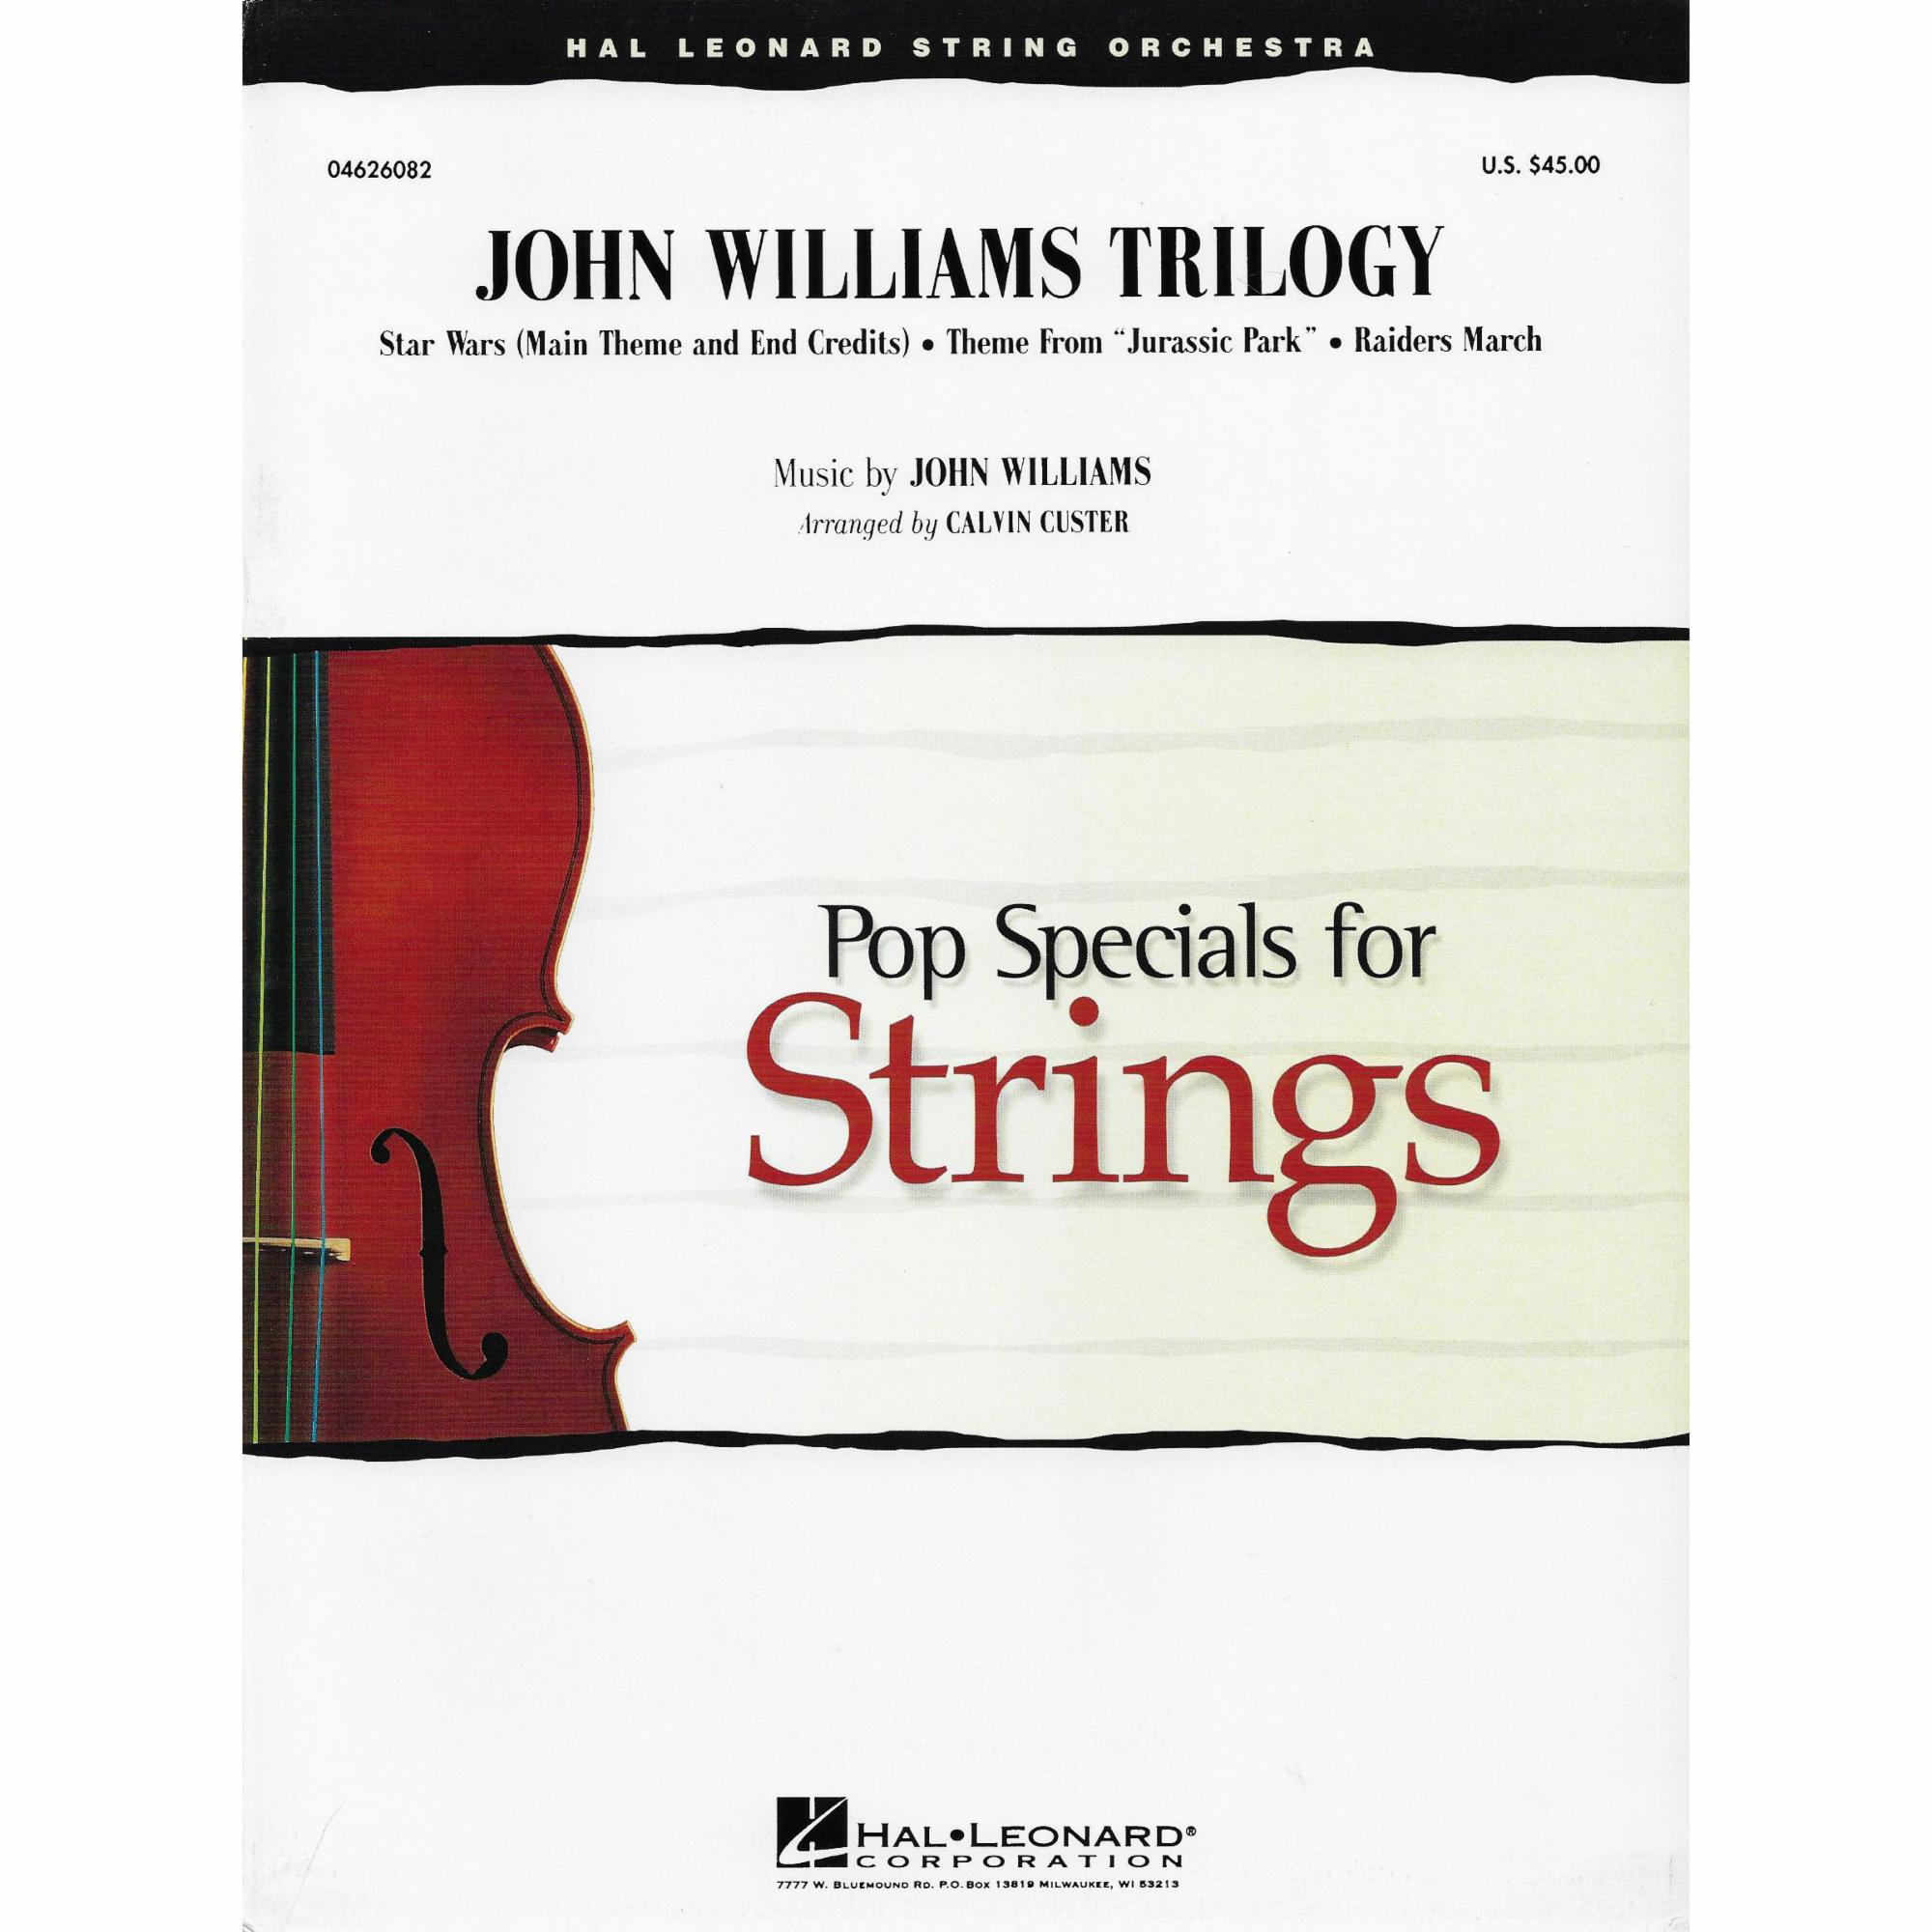 John Williams Trilogy for String Orchestra